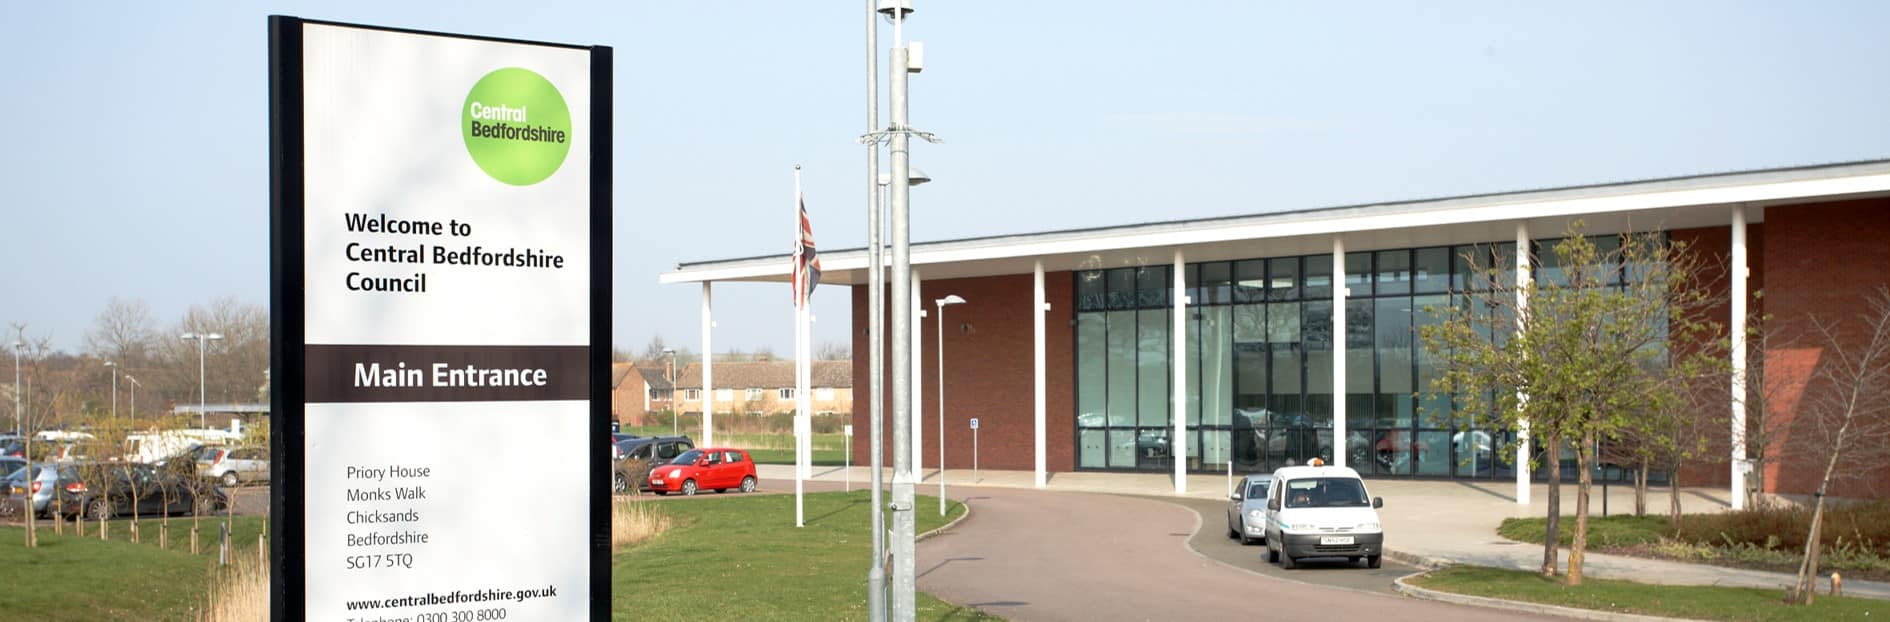 Central Bedfordshire Council Selects RISE With SAP To Transform Public Services Delivery